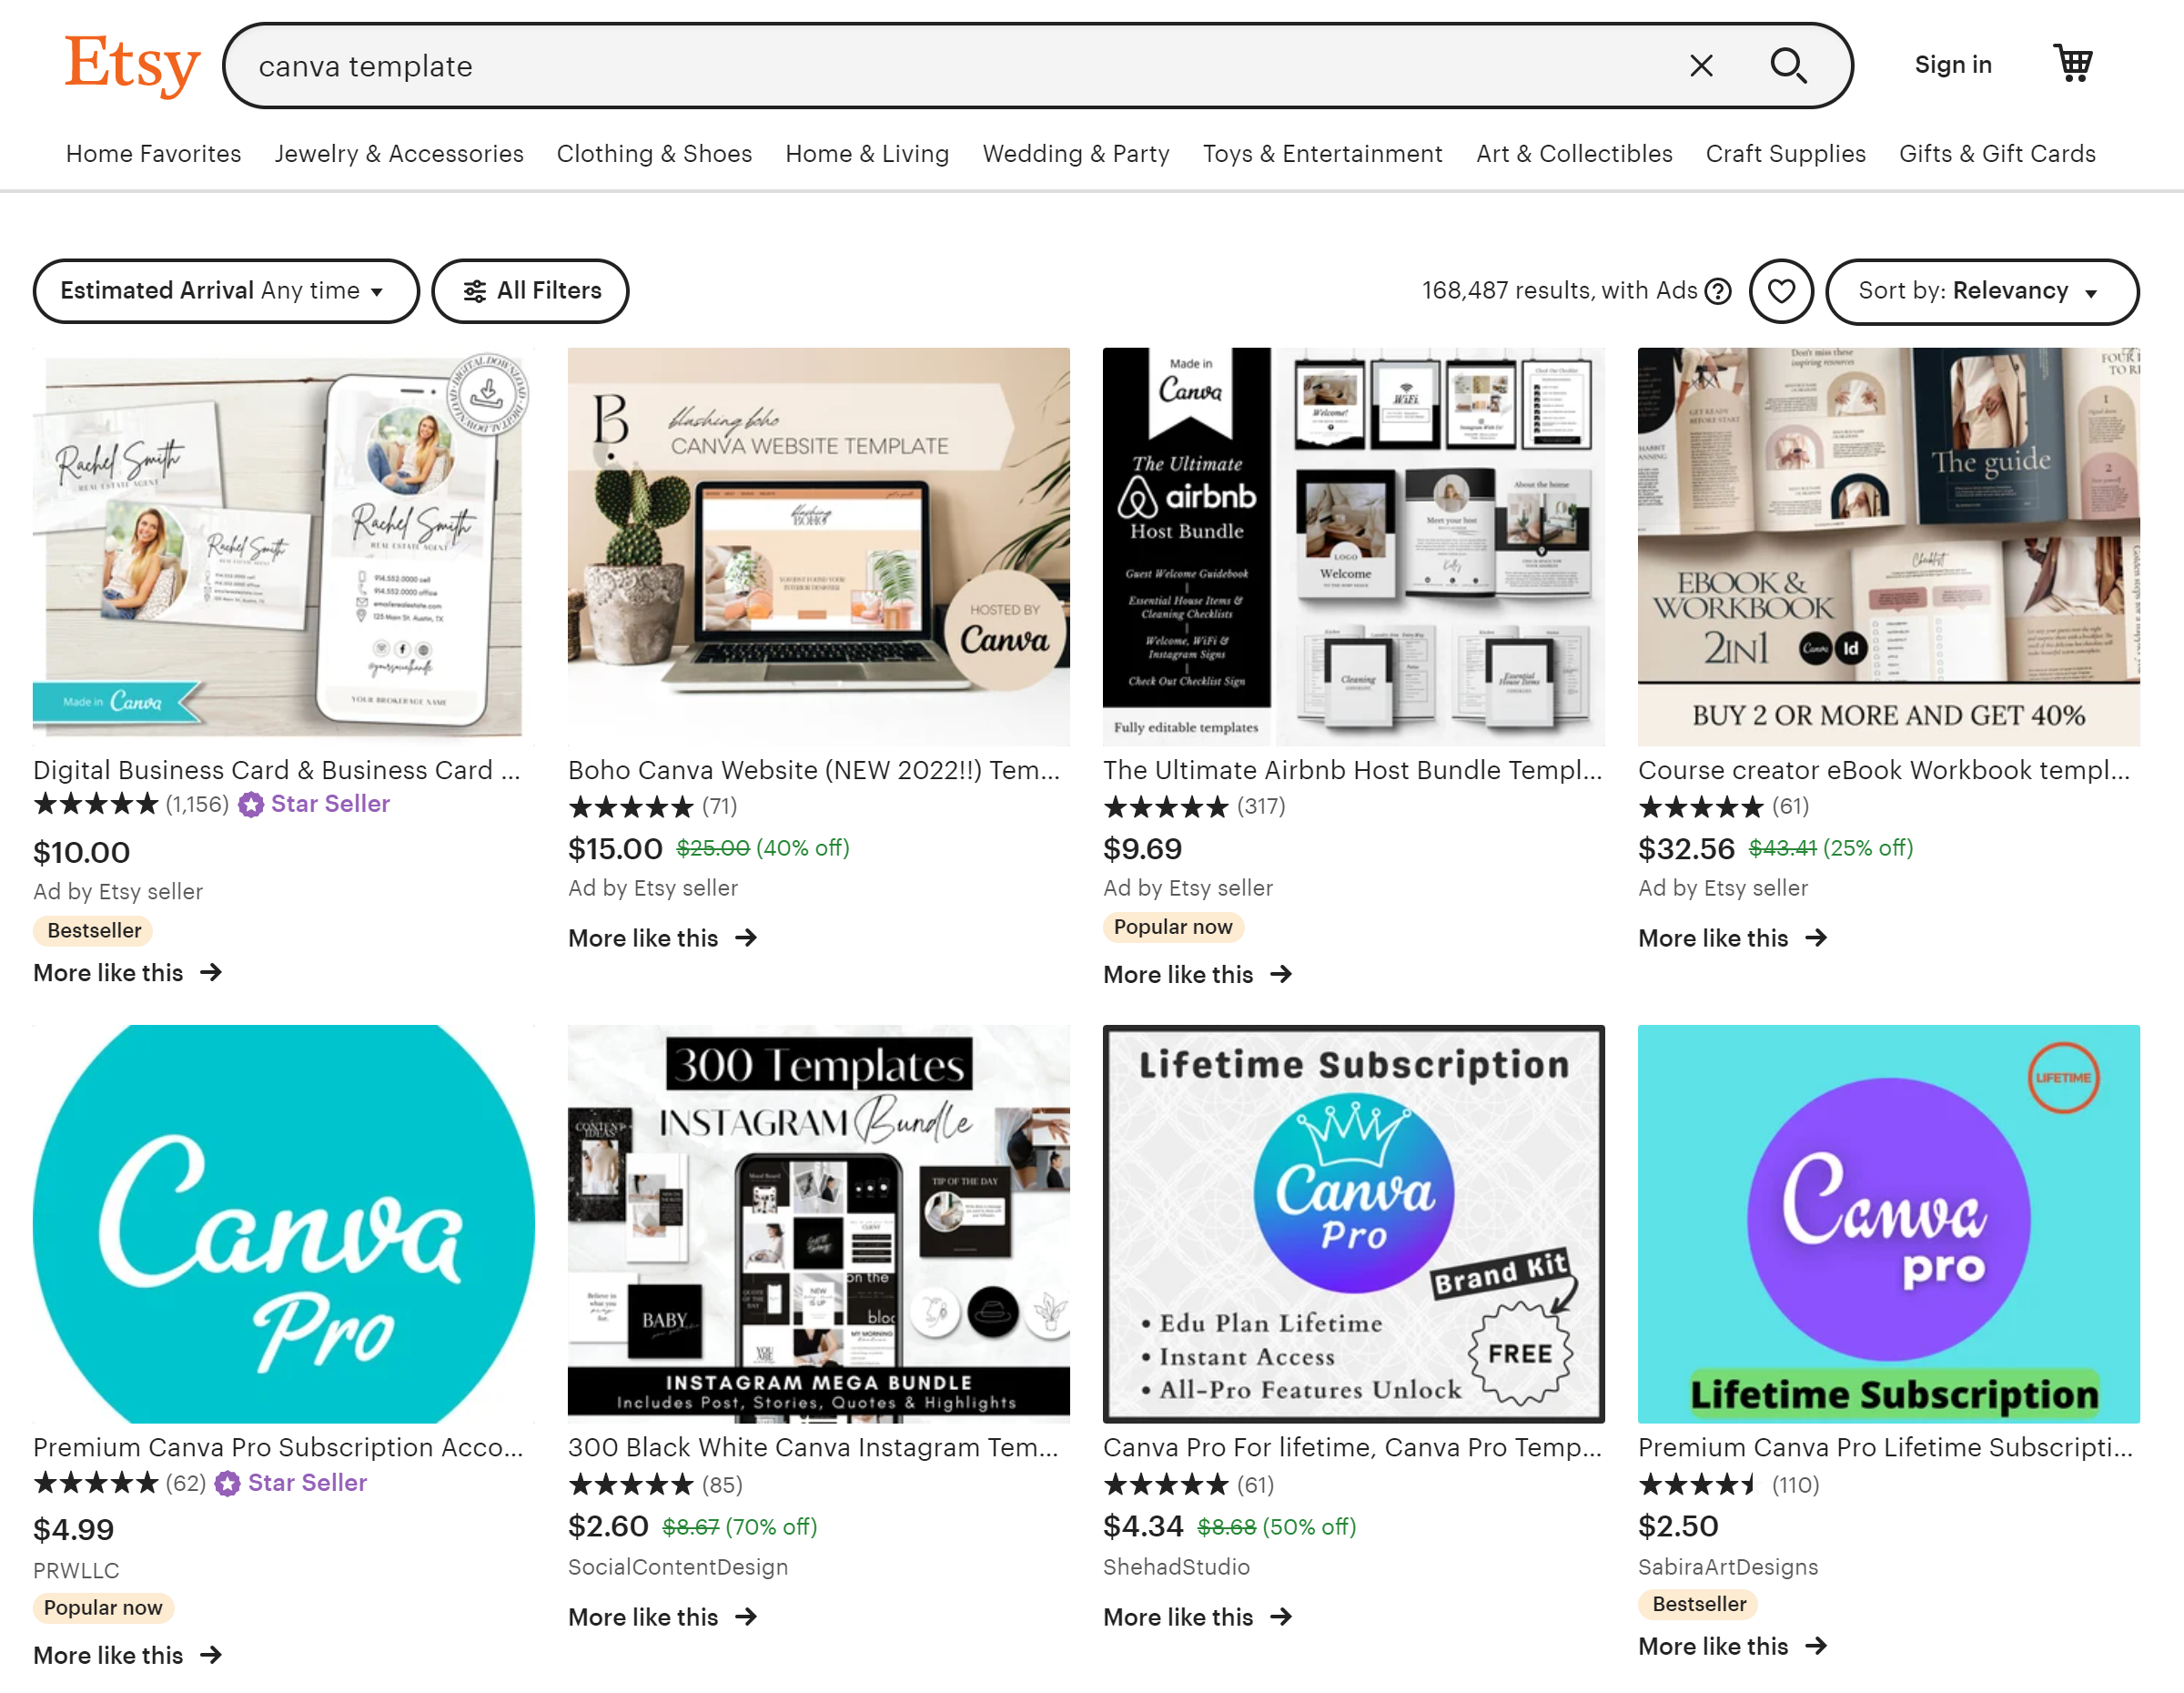 How to sell Canva templates